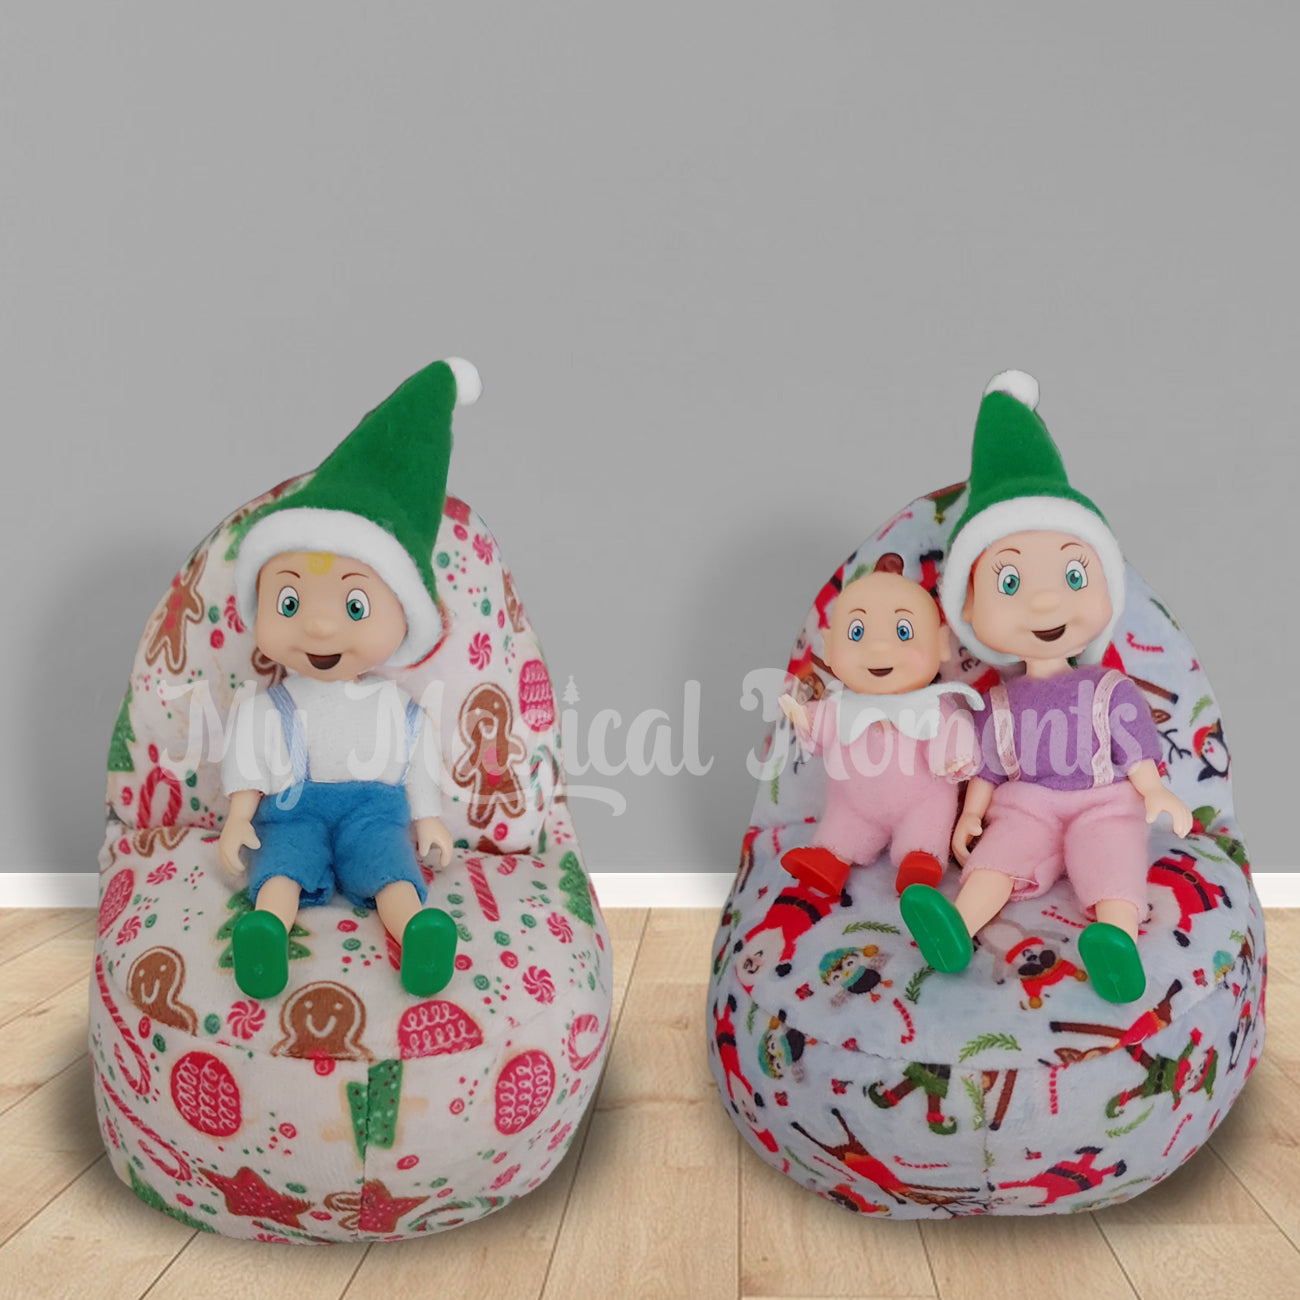 Elf toddlers and elf baby are sitting on miniature bean bags